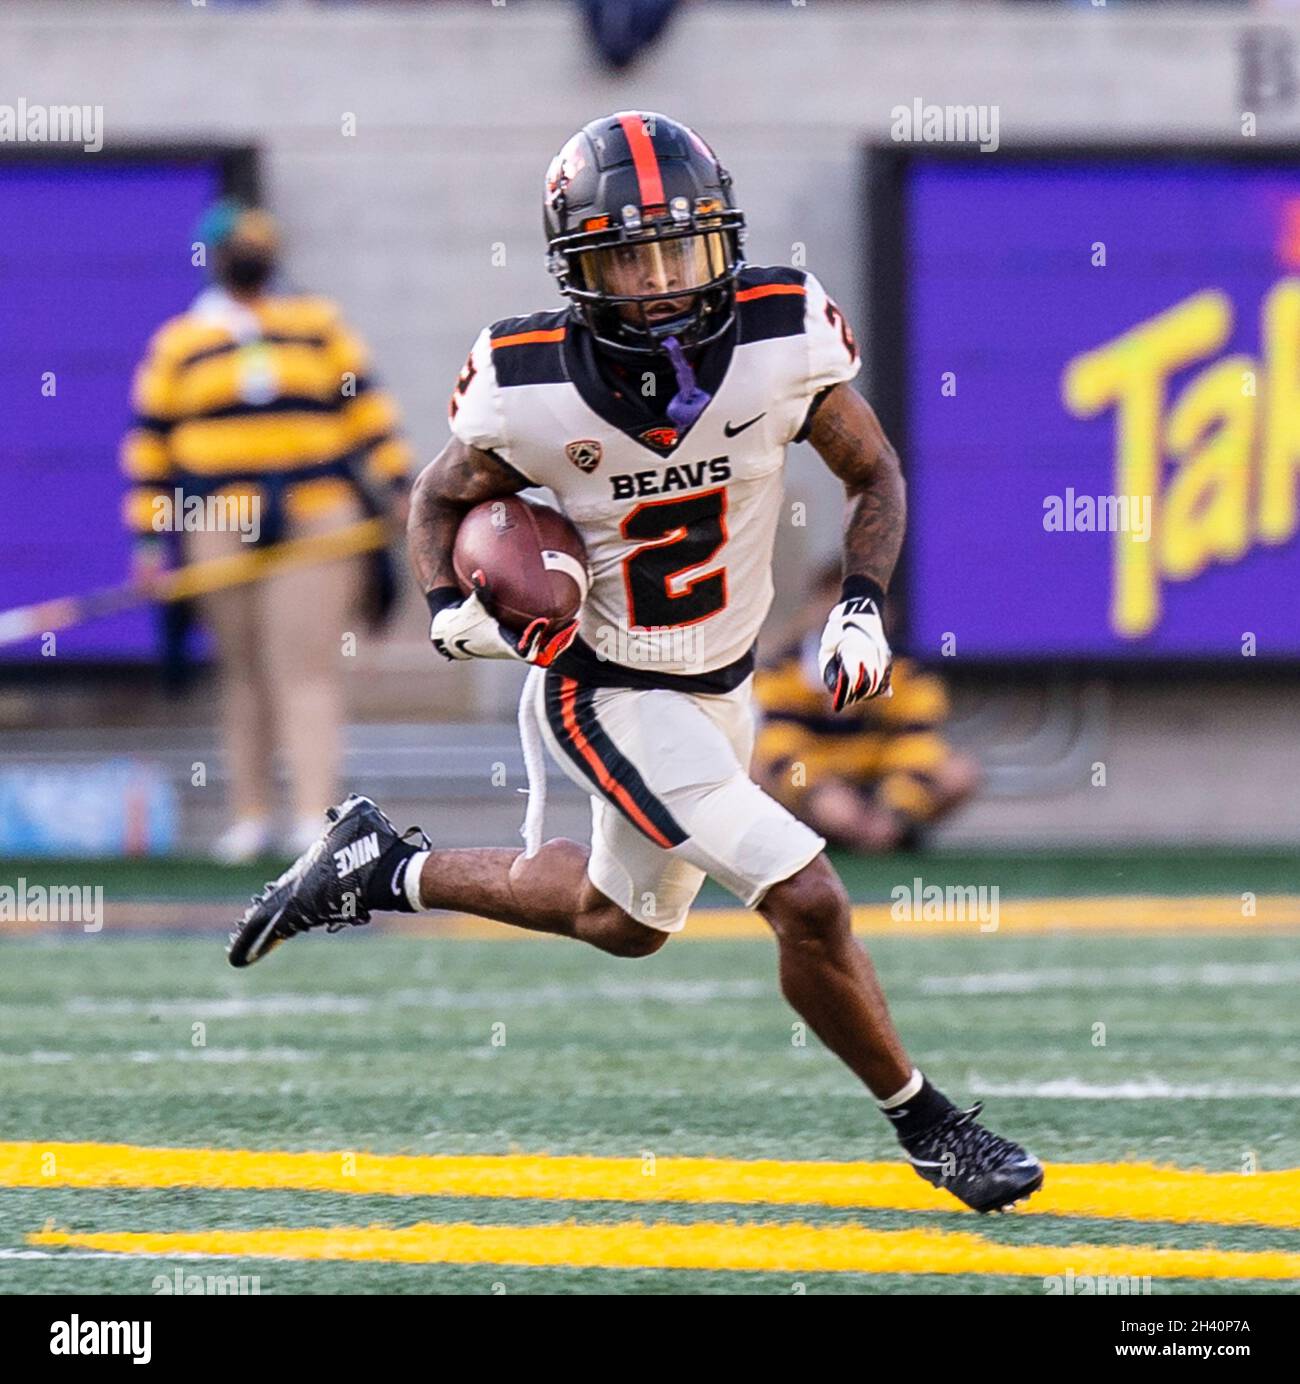 October 30, 2021 Berkeley, CA U.S.A. Oregon State wide receiver Champ Flemings (2) runs for the first down during the NCAA Football game between Oregon State Beavers and the California Golden Bears. California won 39-25 at FTX Field at California Memorial Stadium. Thurman James / (Photo by Thurman James/CSM/Sipa USA) Stock Photo